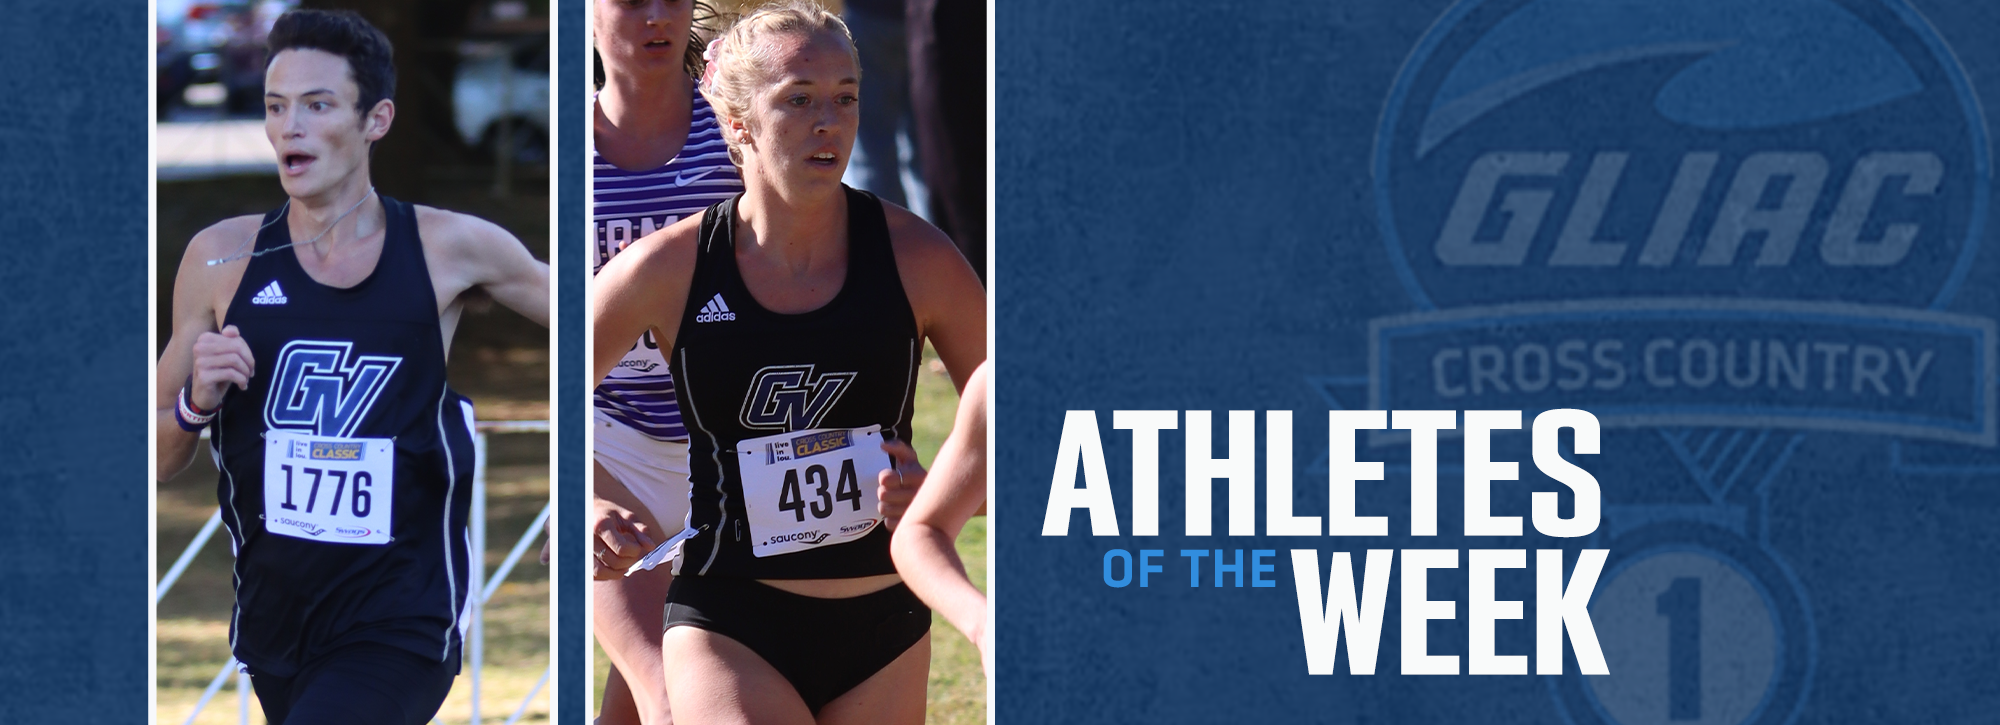 GVSU's Chada and Graber receive athlete of the week honors in cross country